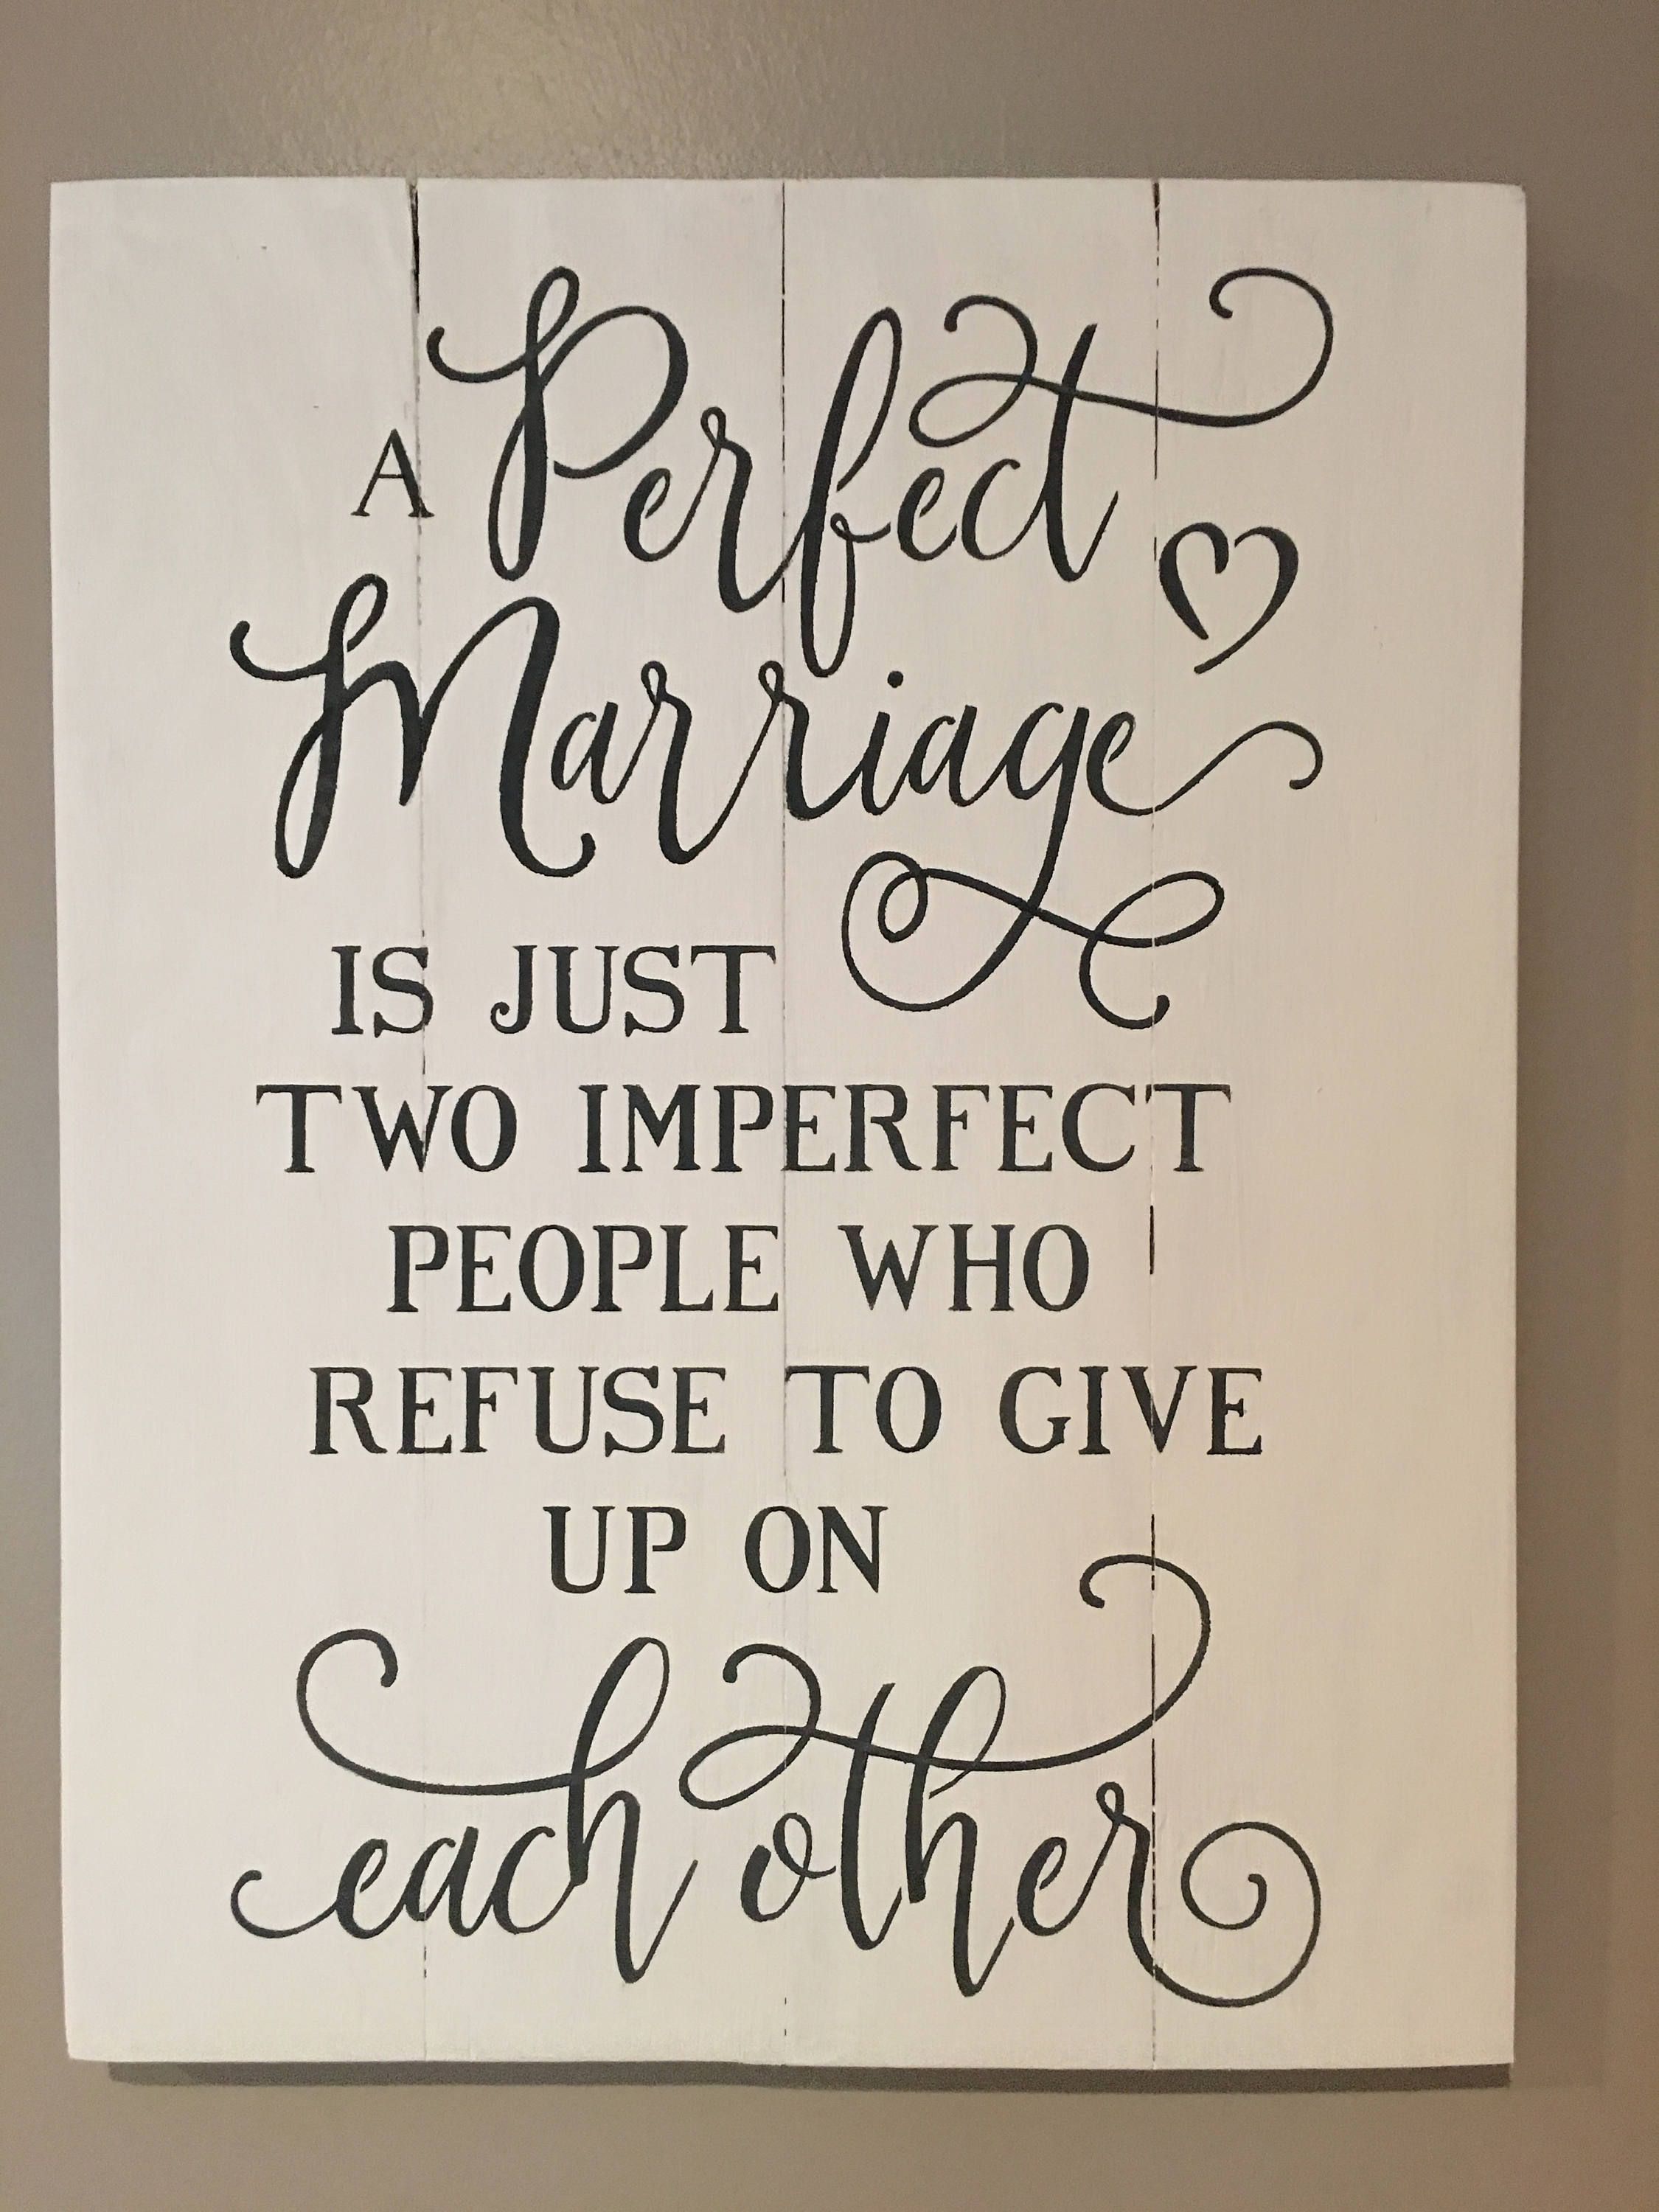 A perfect marriage is just two imperfect people who refuse to give up on each other wood sign, pallet sign, home decor -   19 wedding Quotes for cards ideas